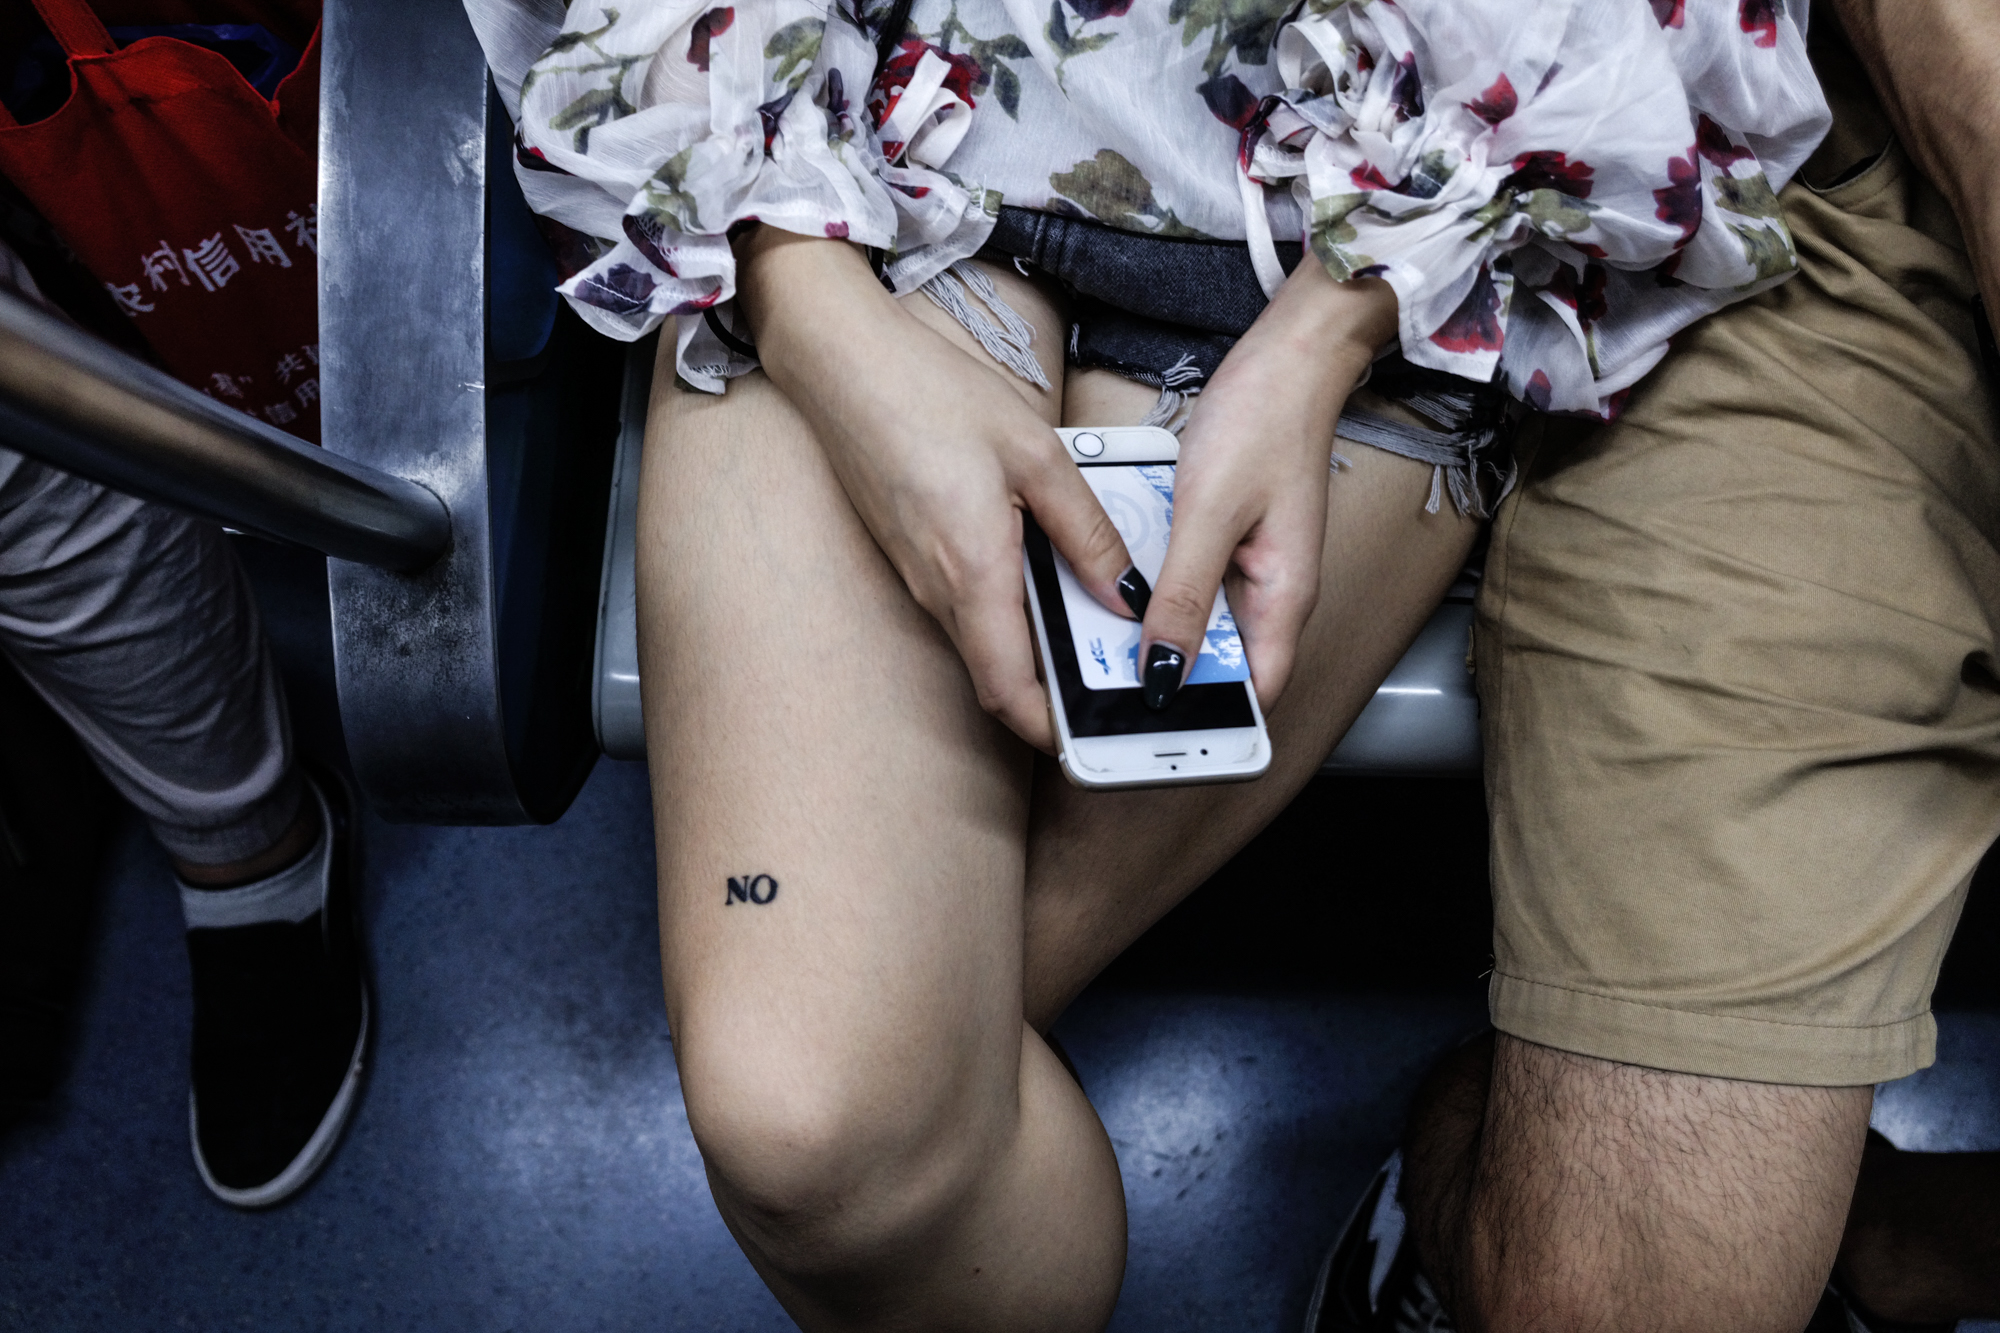  Girl with a NO/ON tattoo on the subway, Beijing, August 2017 